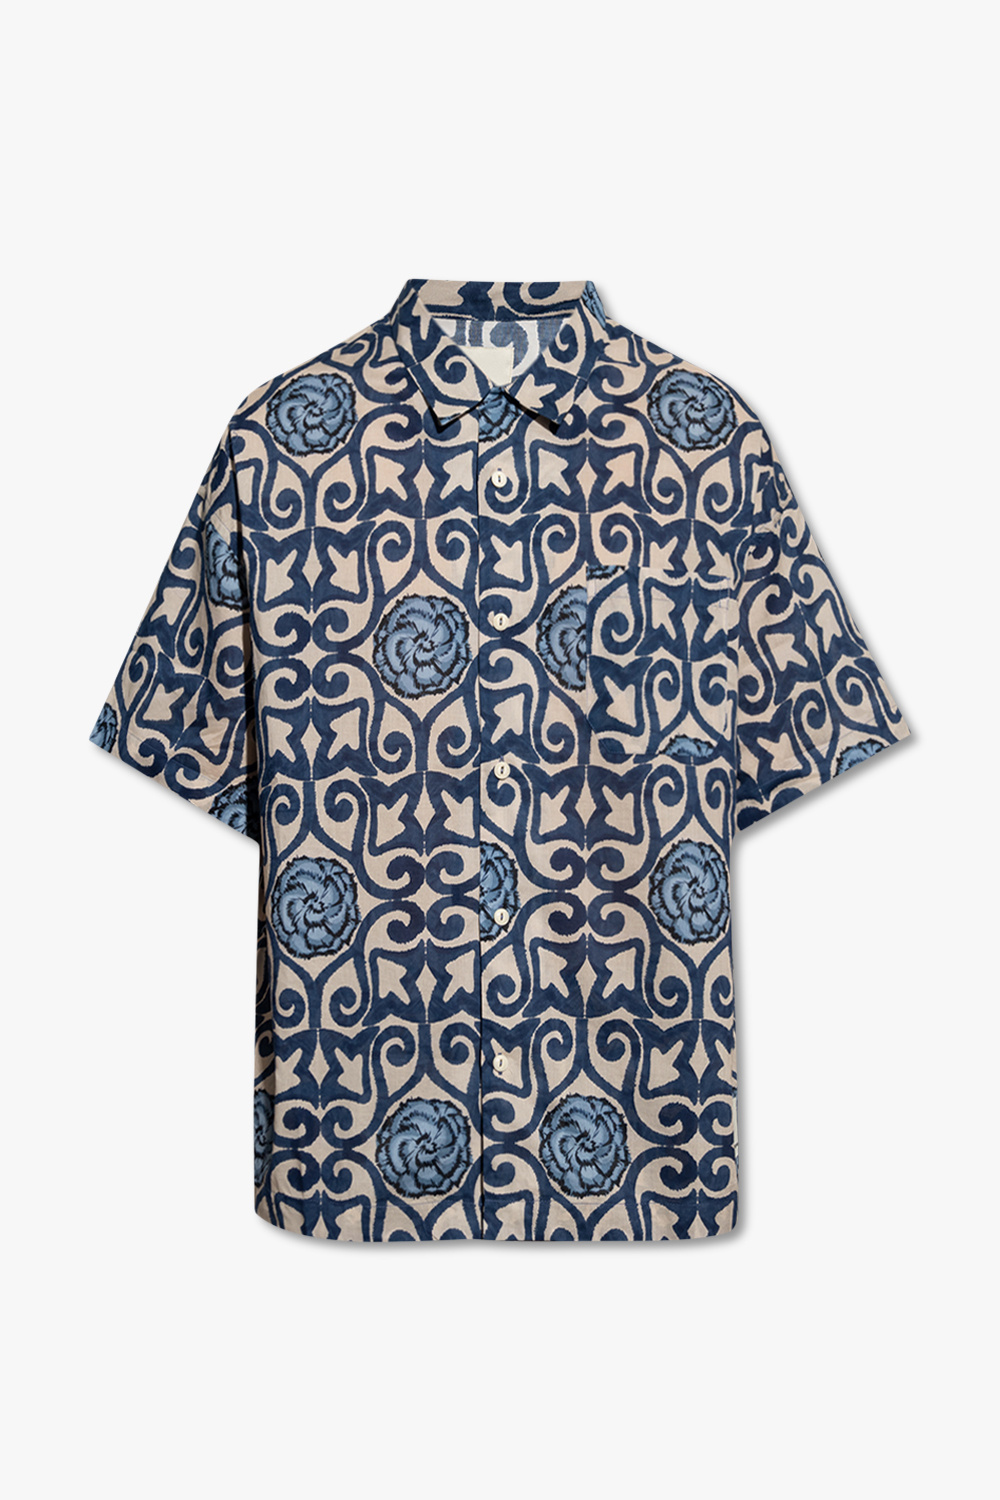 Emporio armani Navy ‘Sustainable’ collection shirt